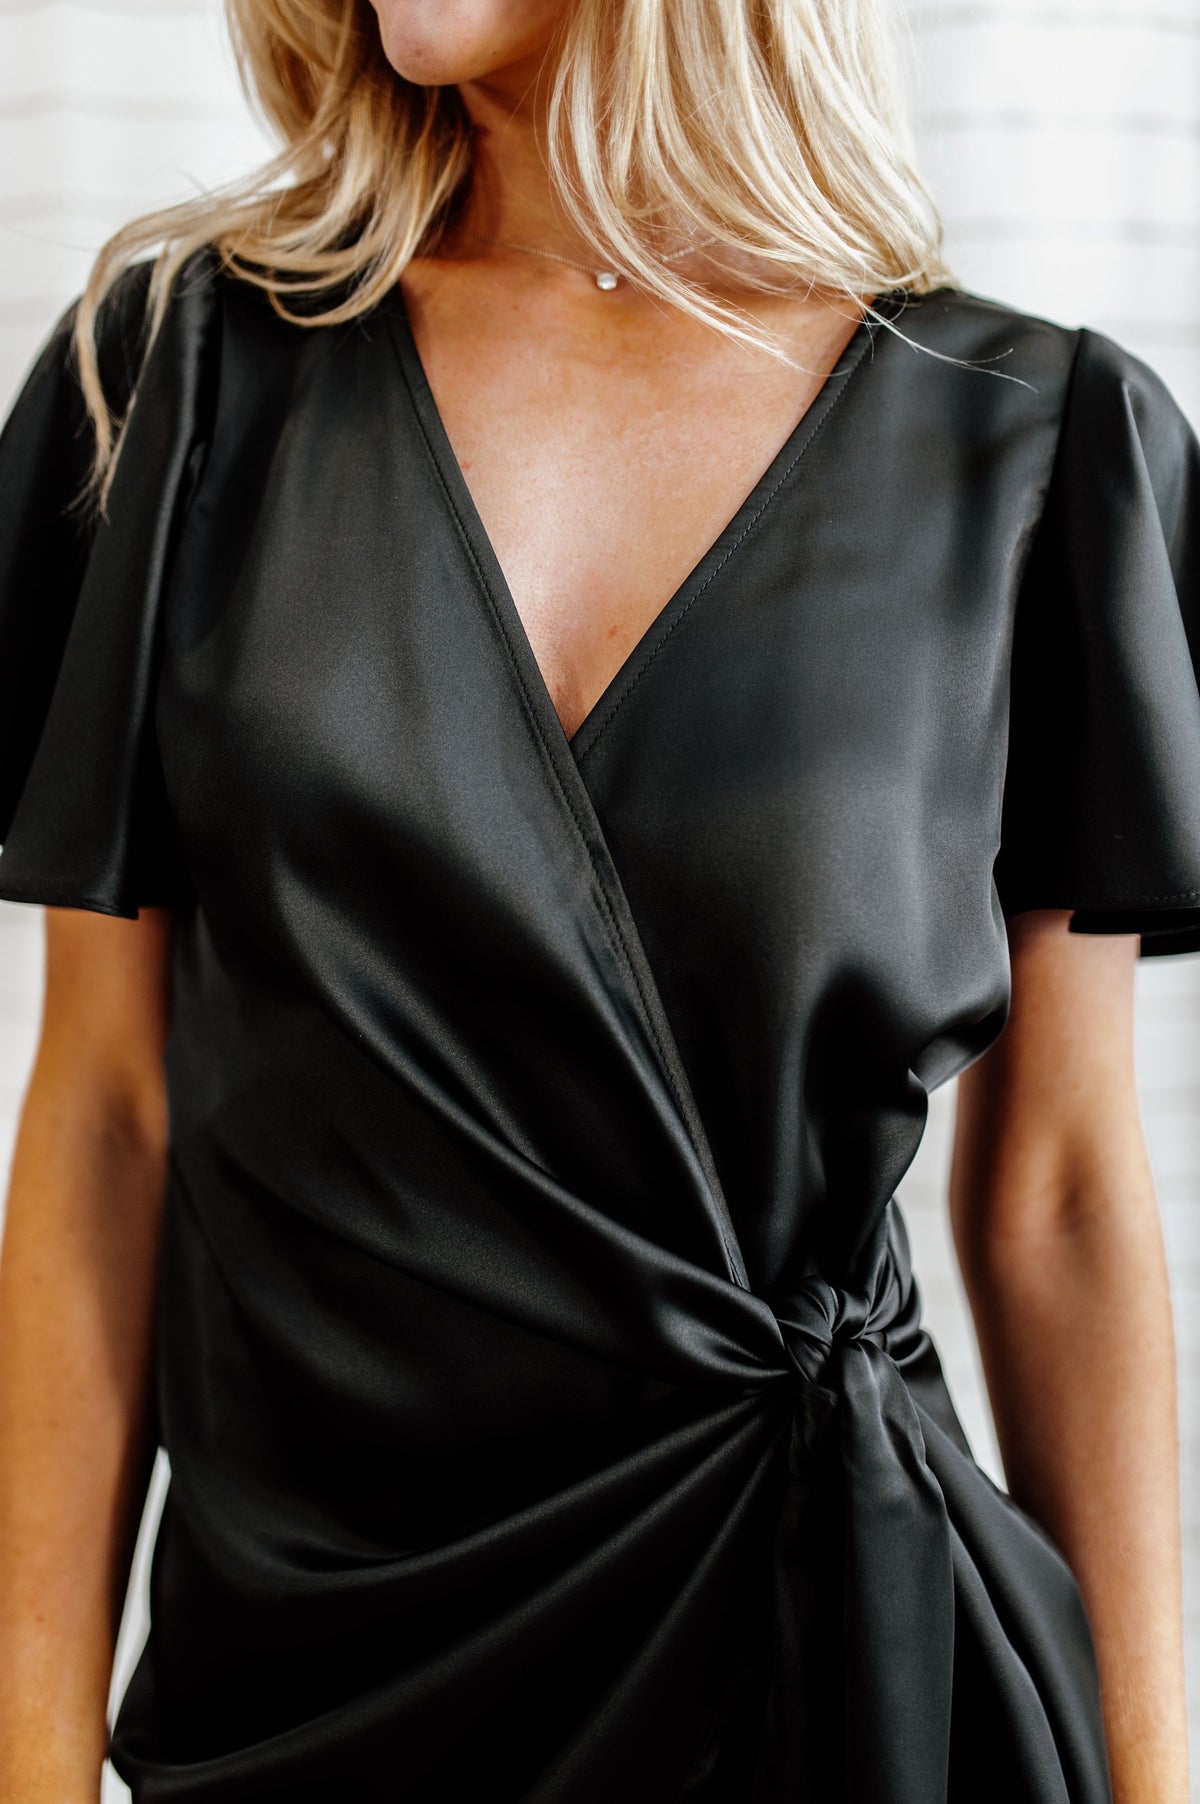 Pictured is a black, silky wrap dress with flowy sleeves and a wrap style body. 